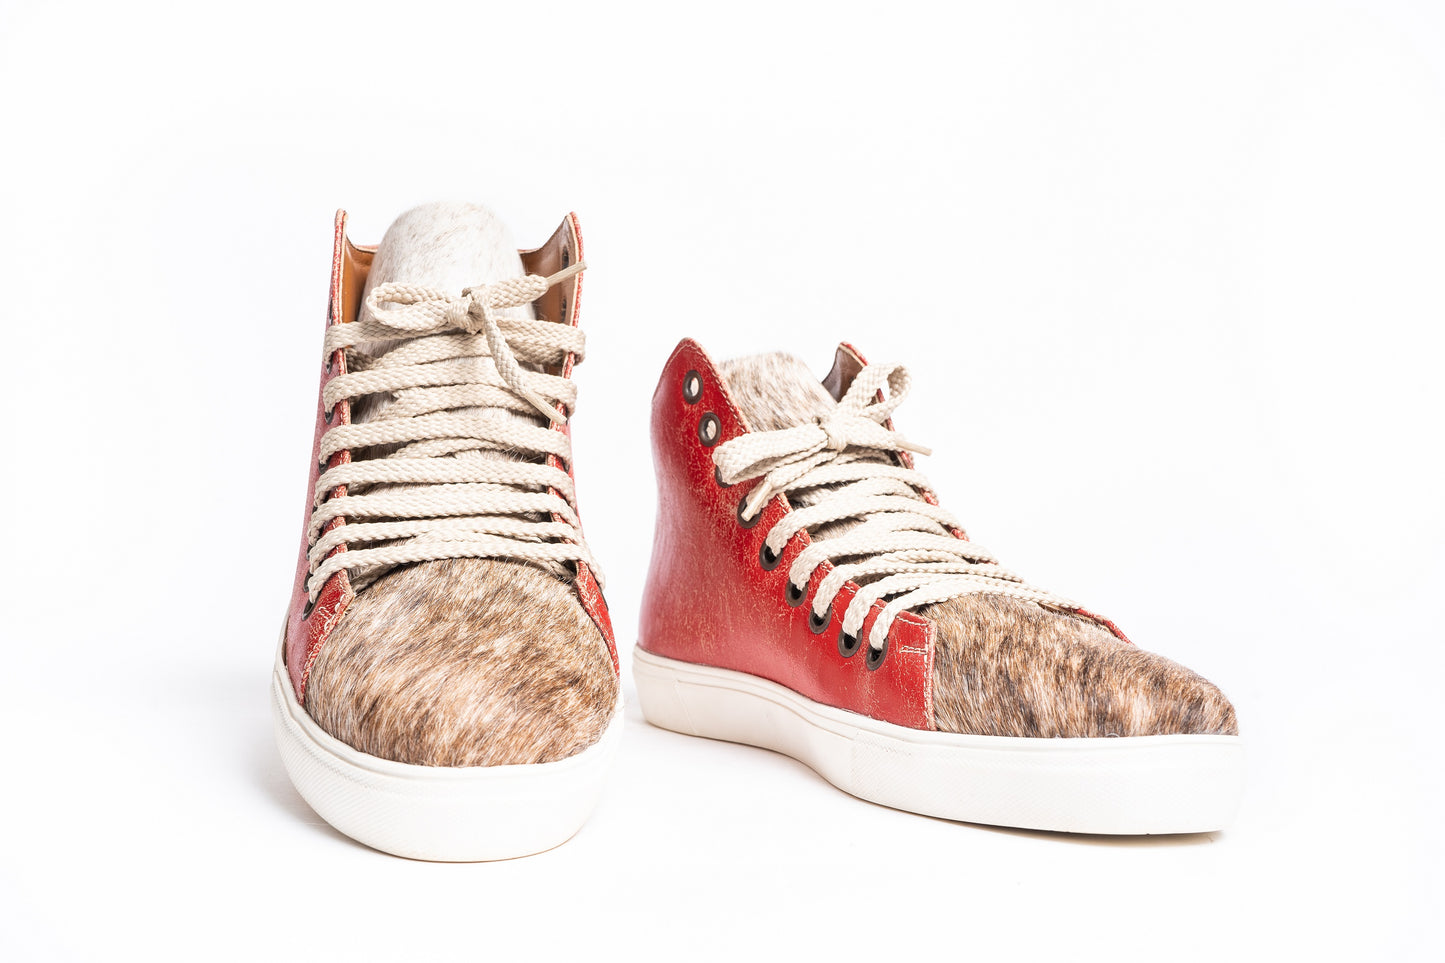 DISTRESSED SNEAKERS - RED